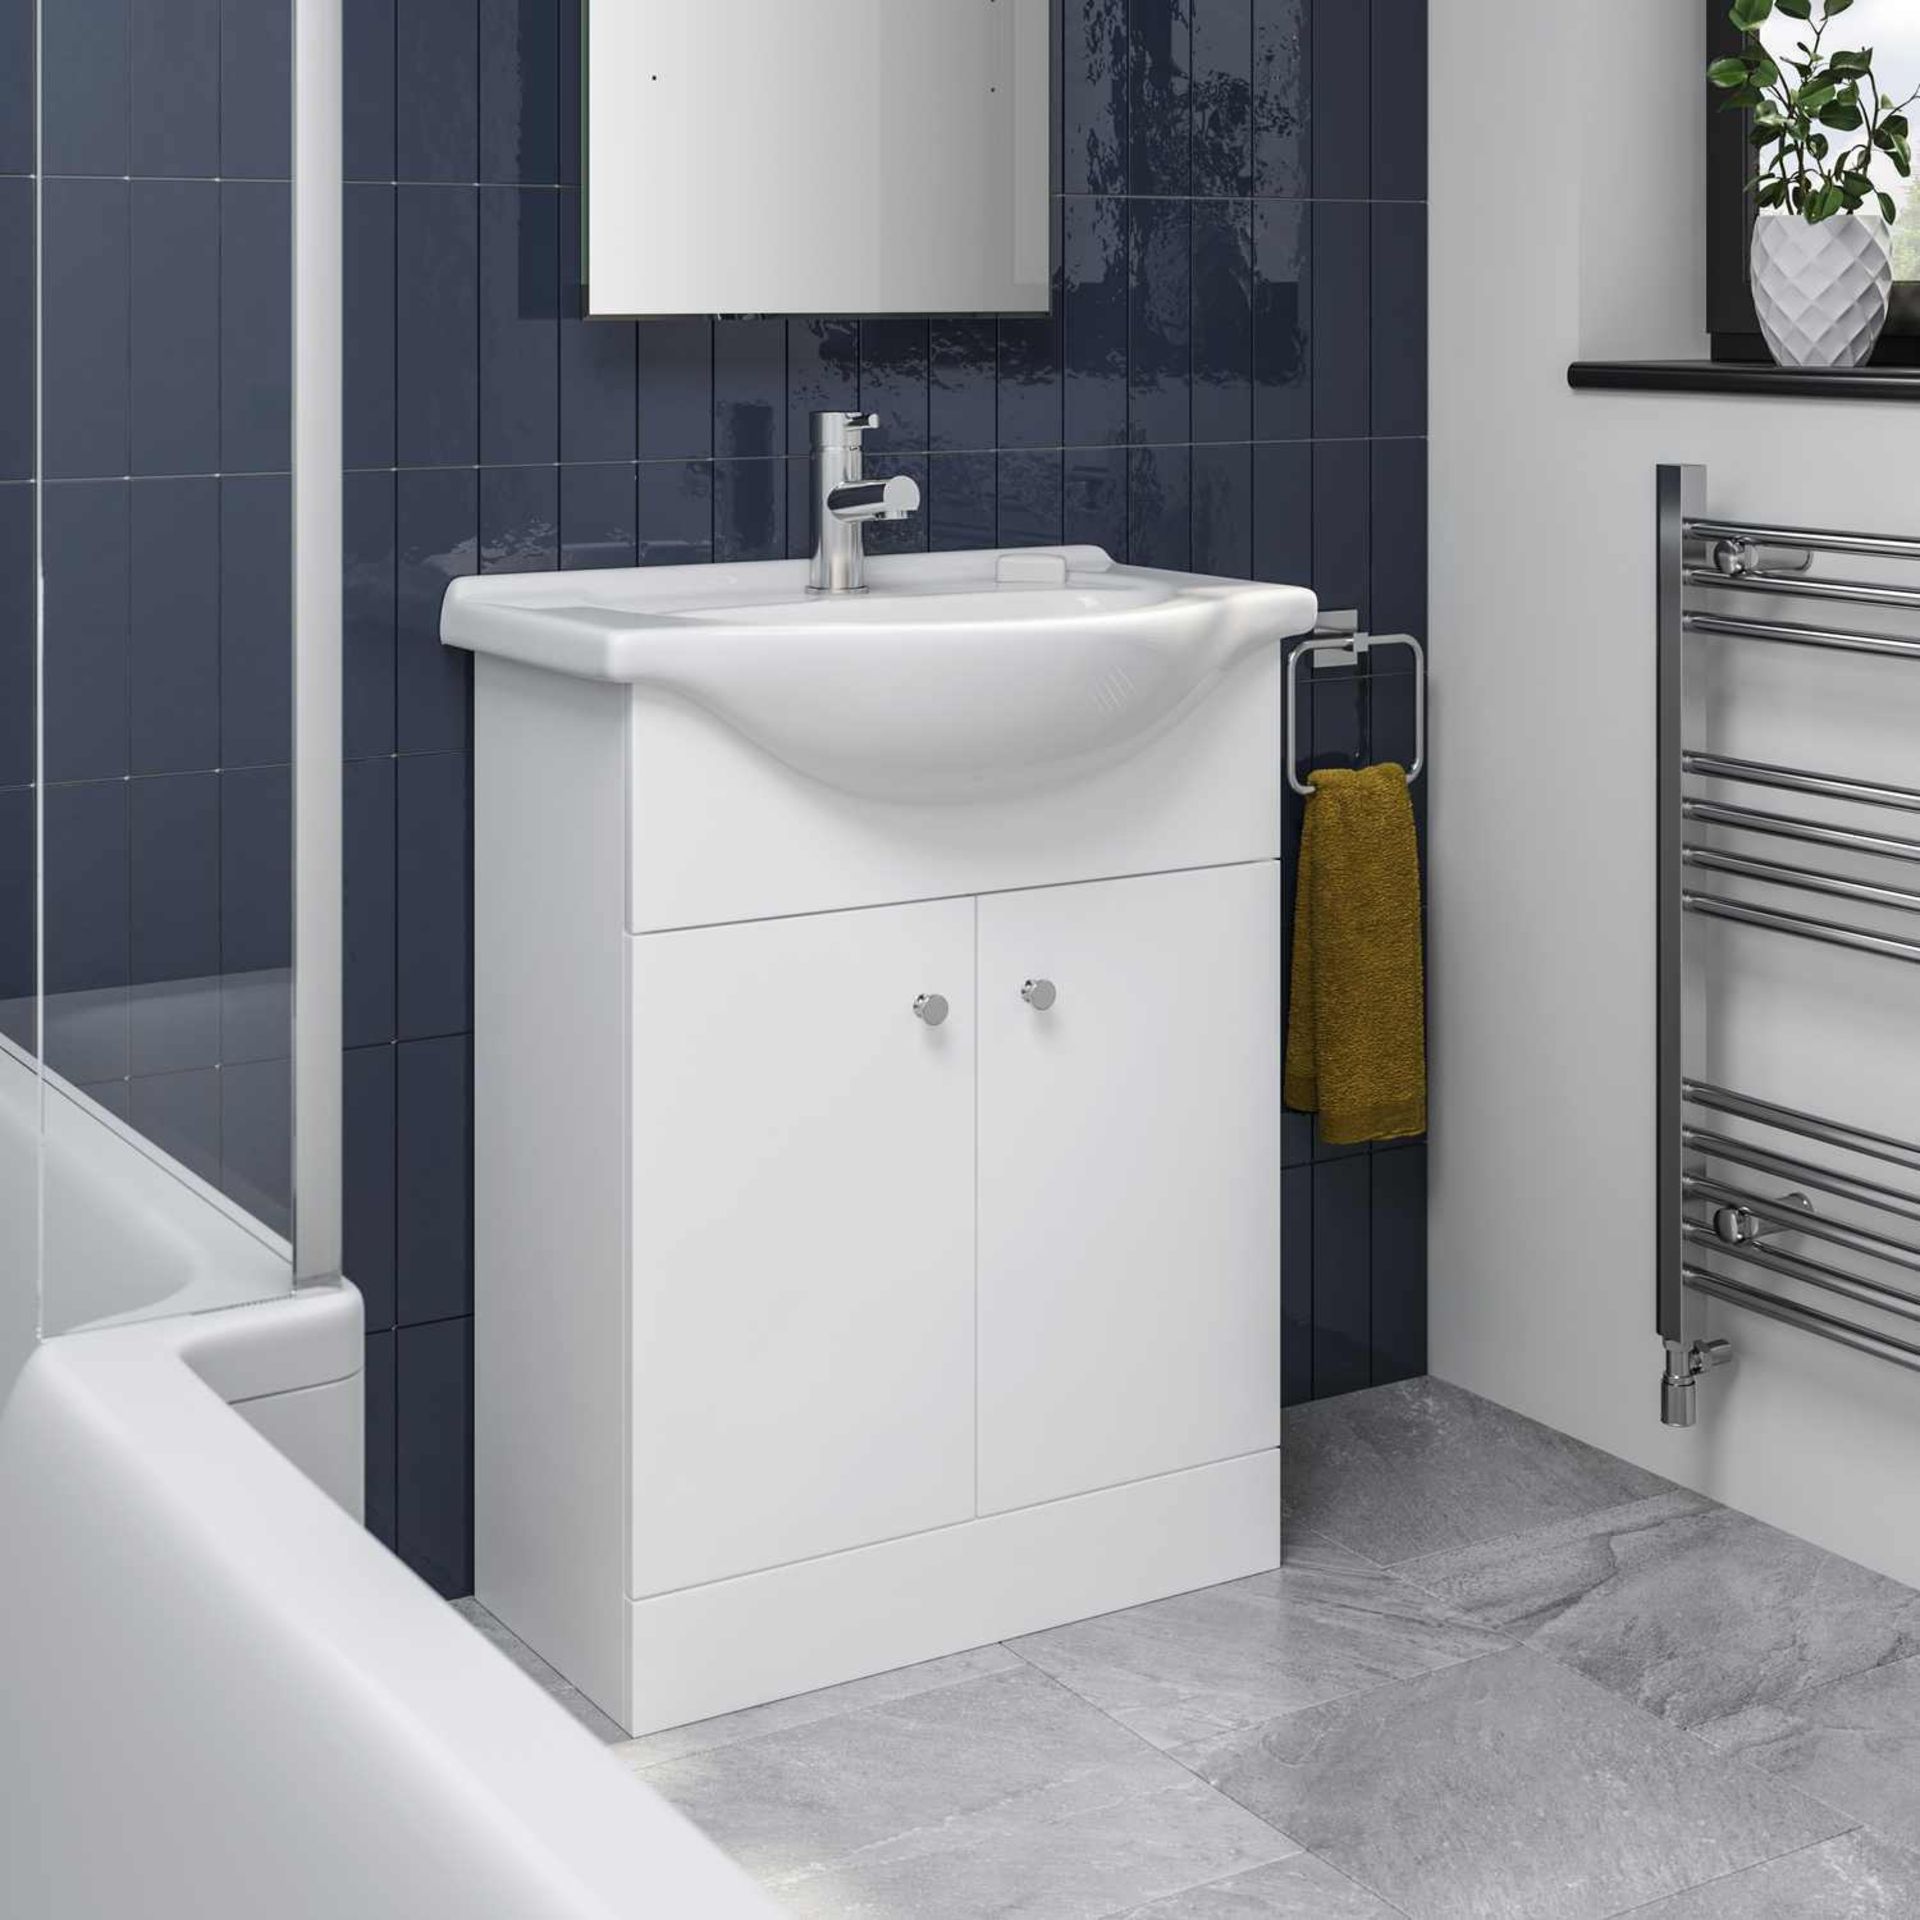 NEW & BOXED 650mm Quartz White Basin Vanity Unit- Floor Standing. RRP £399.99.Comes complete... - Image 3 of 3